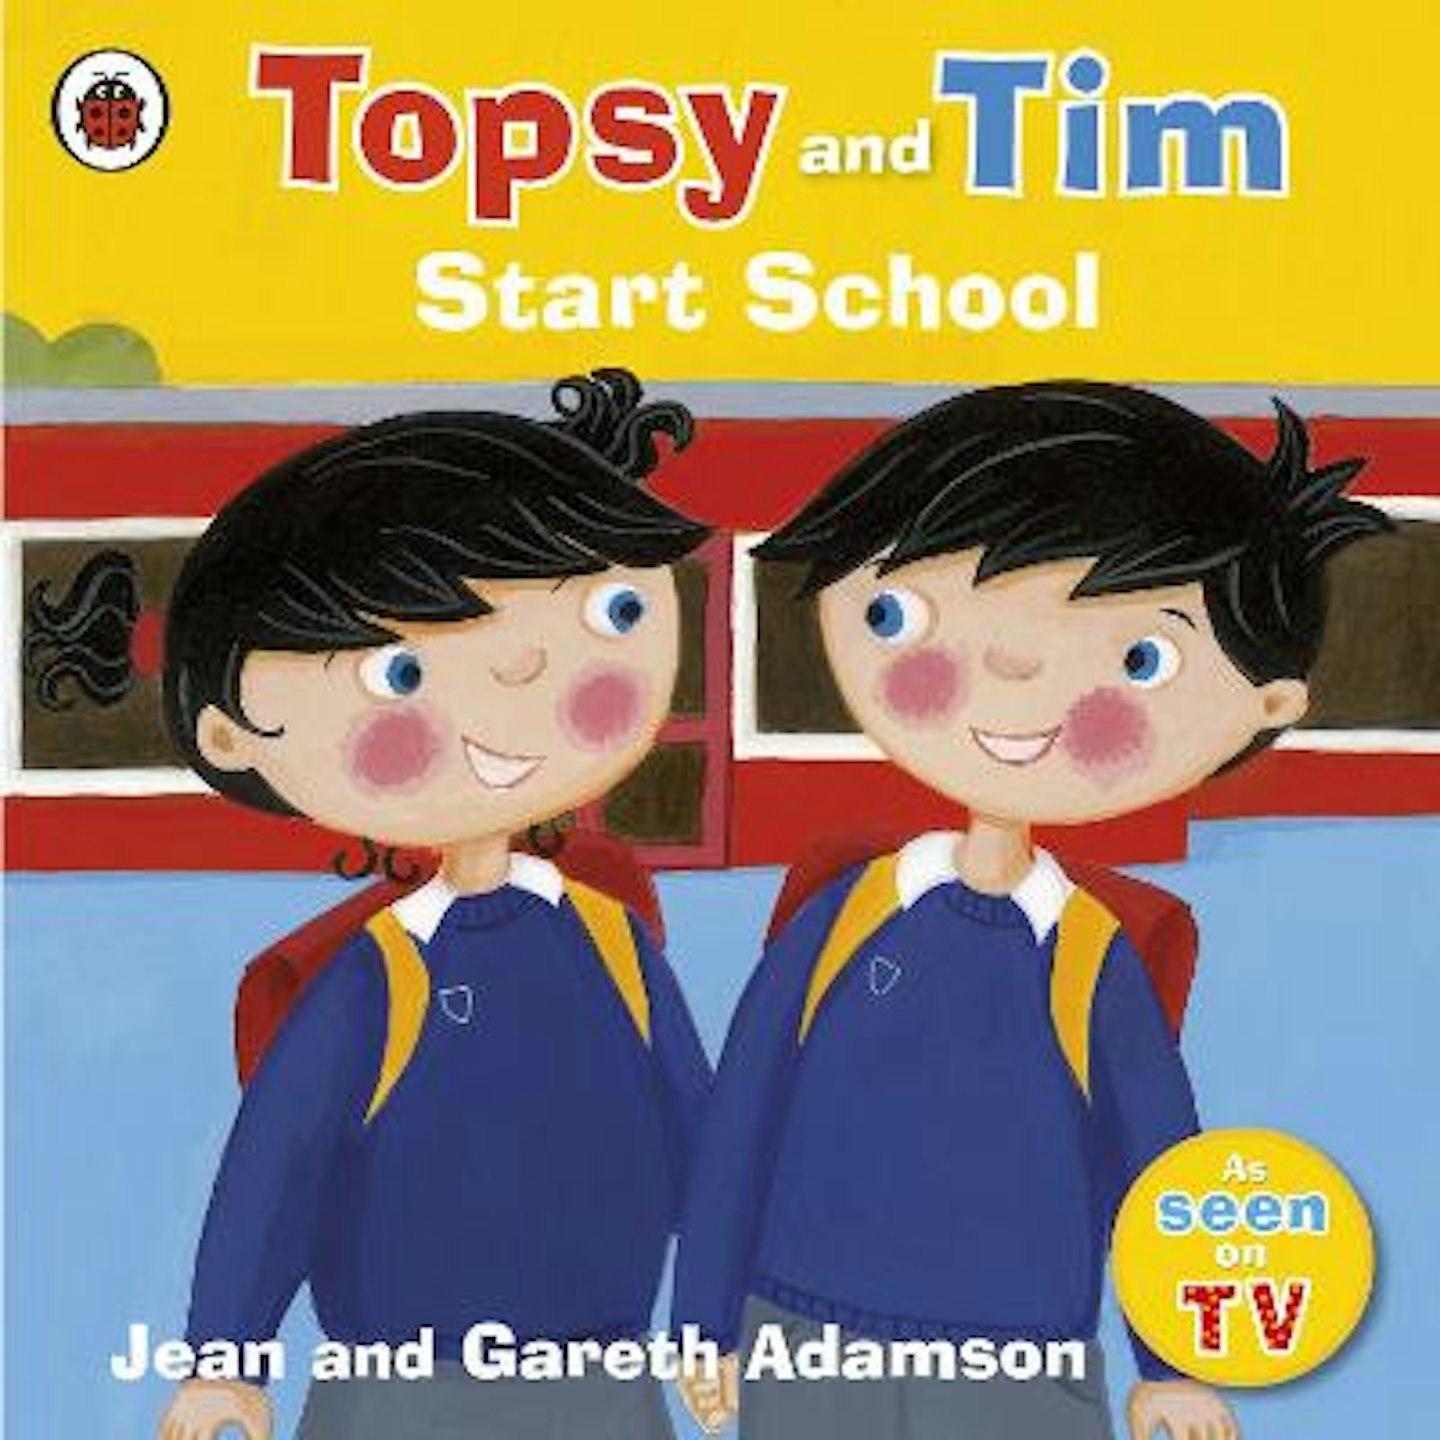 Topsy and Tim: Start School by Jean and Gareth Adamson (3+, Fiction)